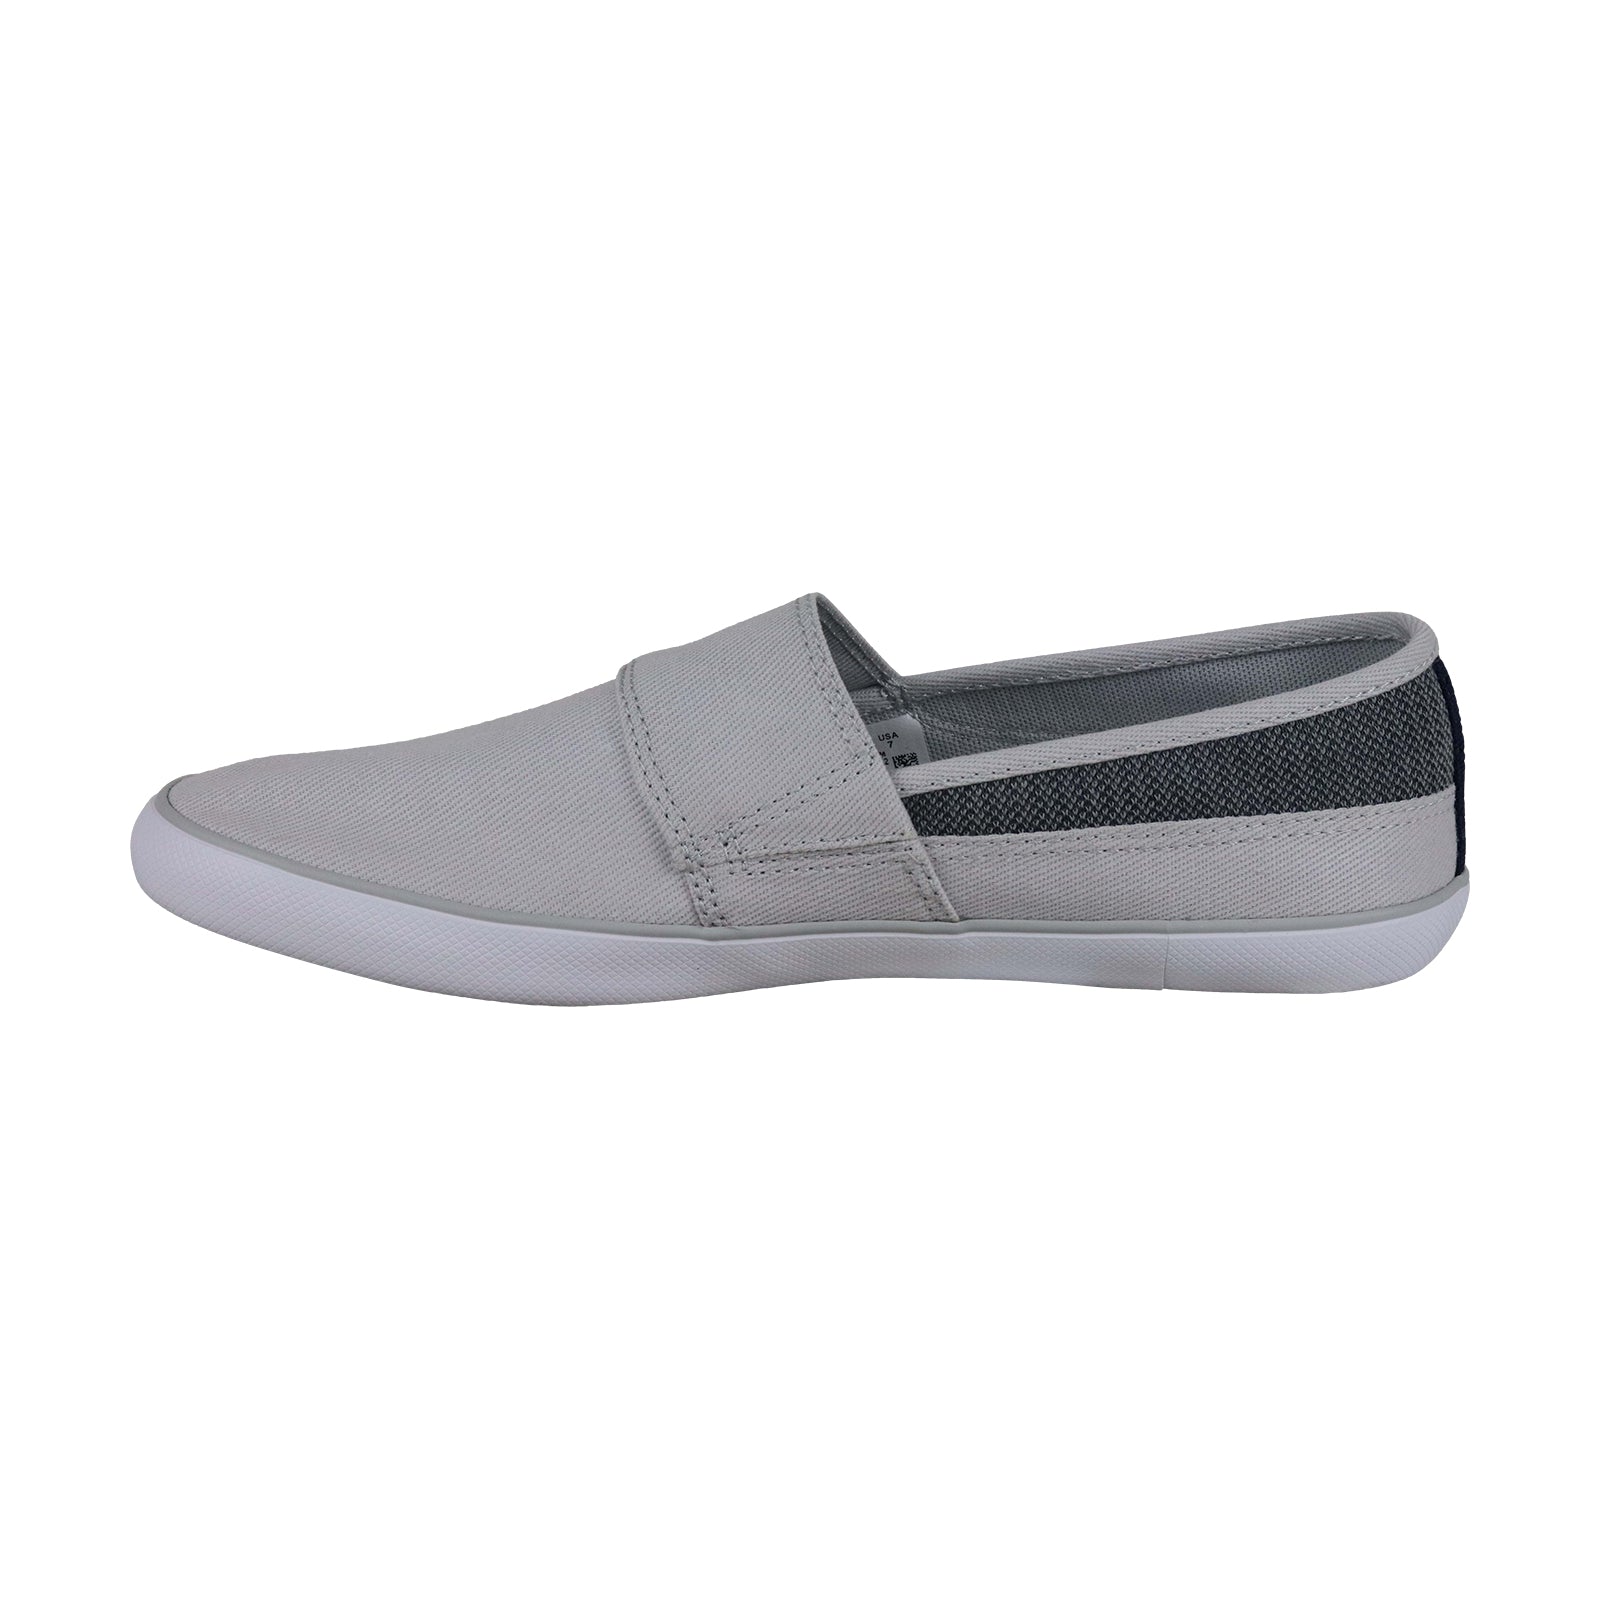 Lacoste Marice 318 1 Ca Mens Gray Canvas Slip On Lifestyle Snea - Ruze Shoes